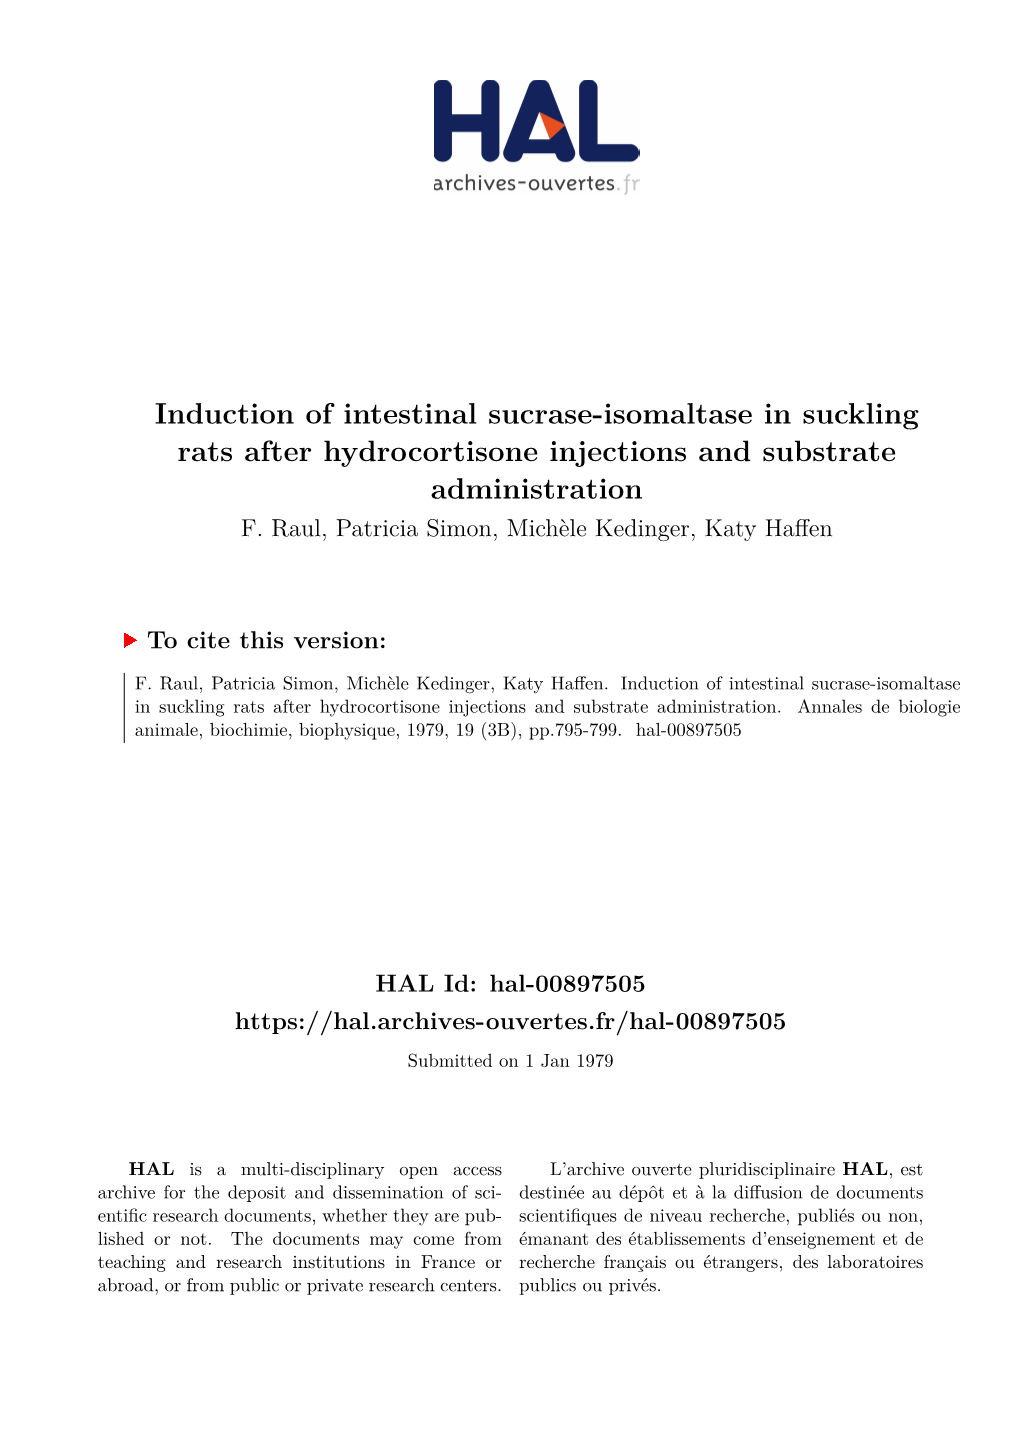 Induction of Intestinal Sucrase-Isomaltase in Suckling Rats After Hydrocortisone Injections and Substrate Administration F